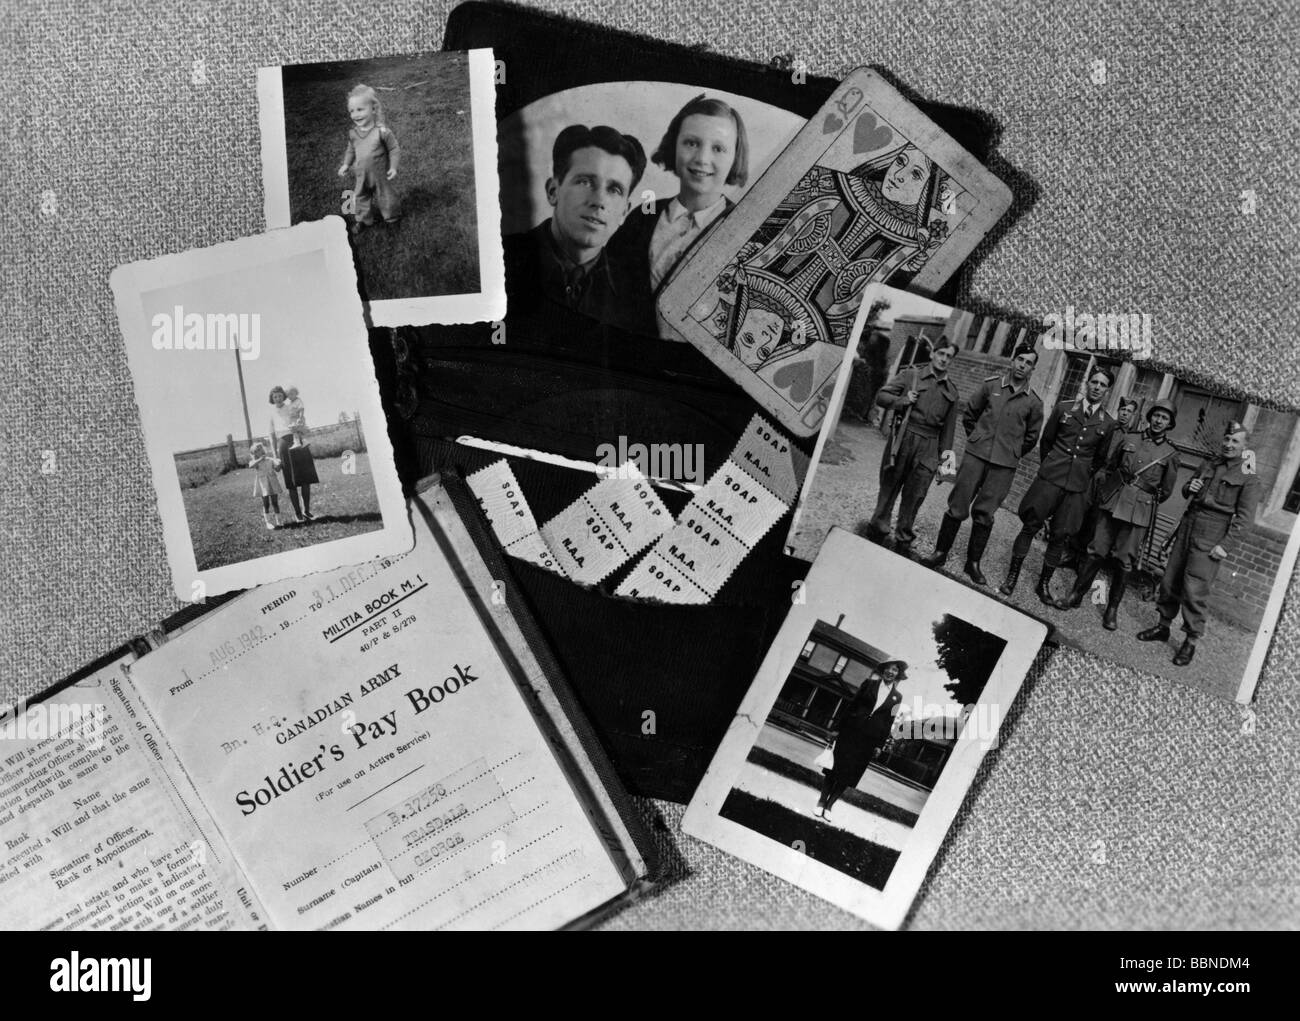 events, Second World War / WWII, France, Dieppe, 19.8.1942, belongings of a fallen Canadian soldier, Stock Photo